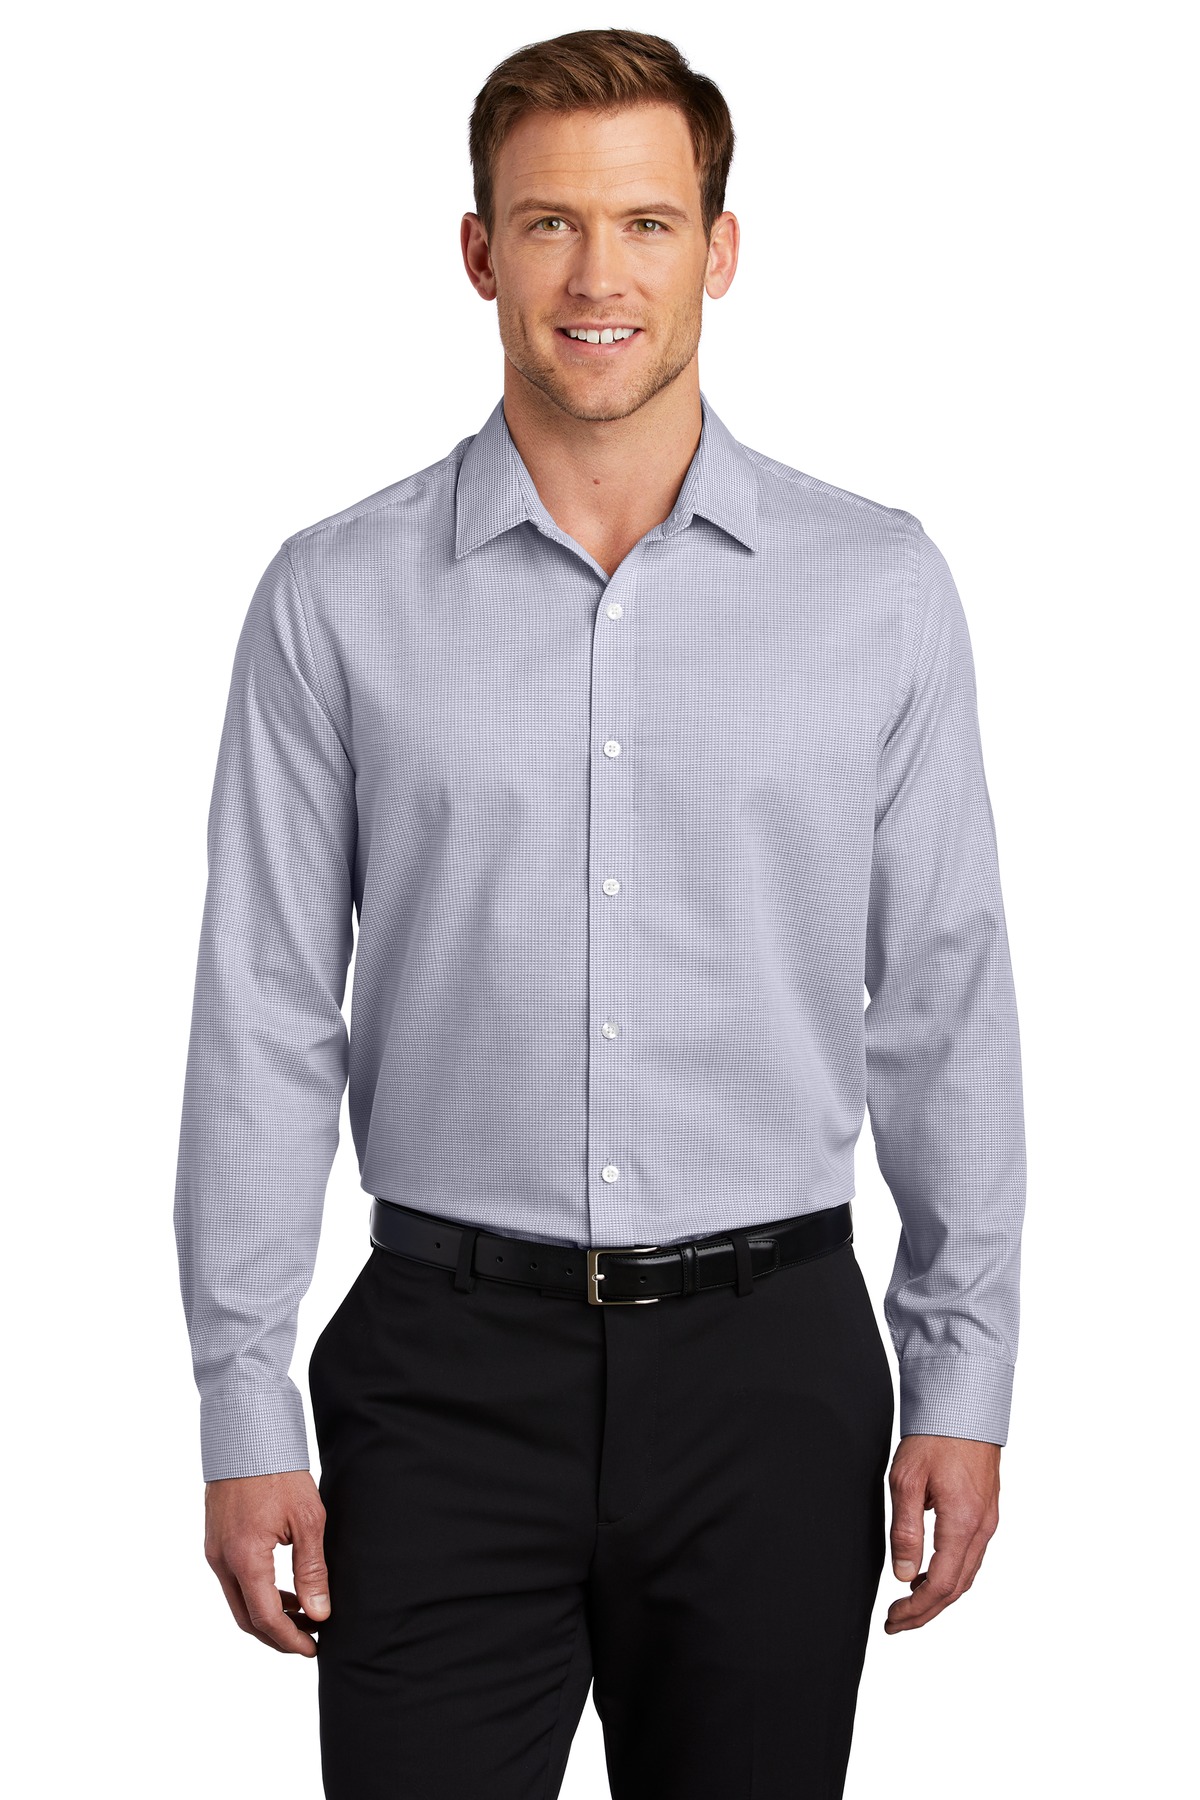 Port Authority  Pincheck Easy Care Shirt W645